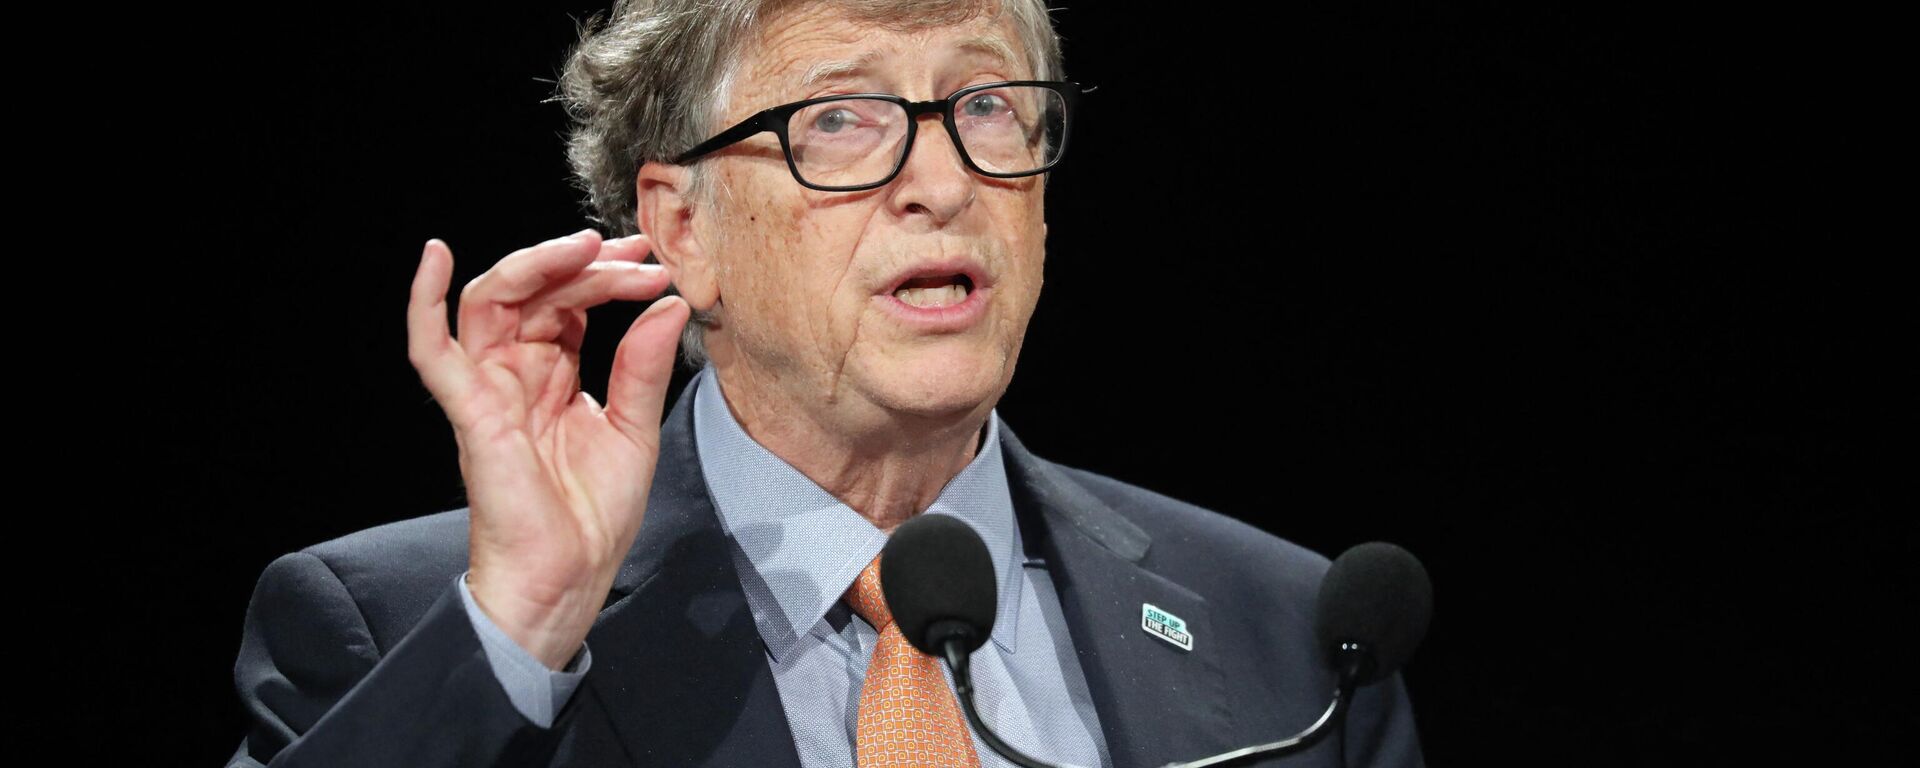 Microsoft founder, Co-Chairman of the Bill & Melinda Gates Foundation, Bill Gates delivers a speech during the conference of Global Fund to Fight HIV, Tuberculosis and Malaria on october 10, 2019, in Lyon, central eastern France - Sputnik International, 1920, 29.05.2022